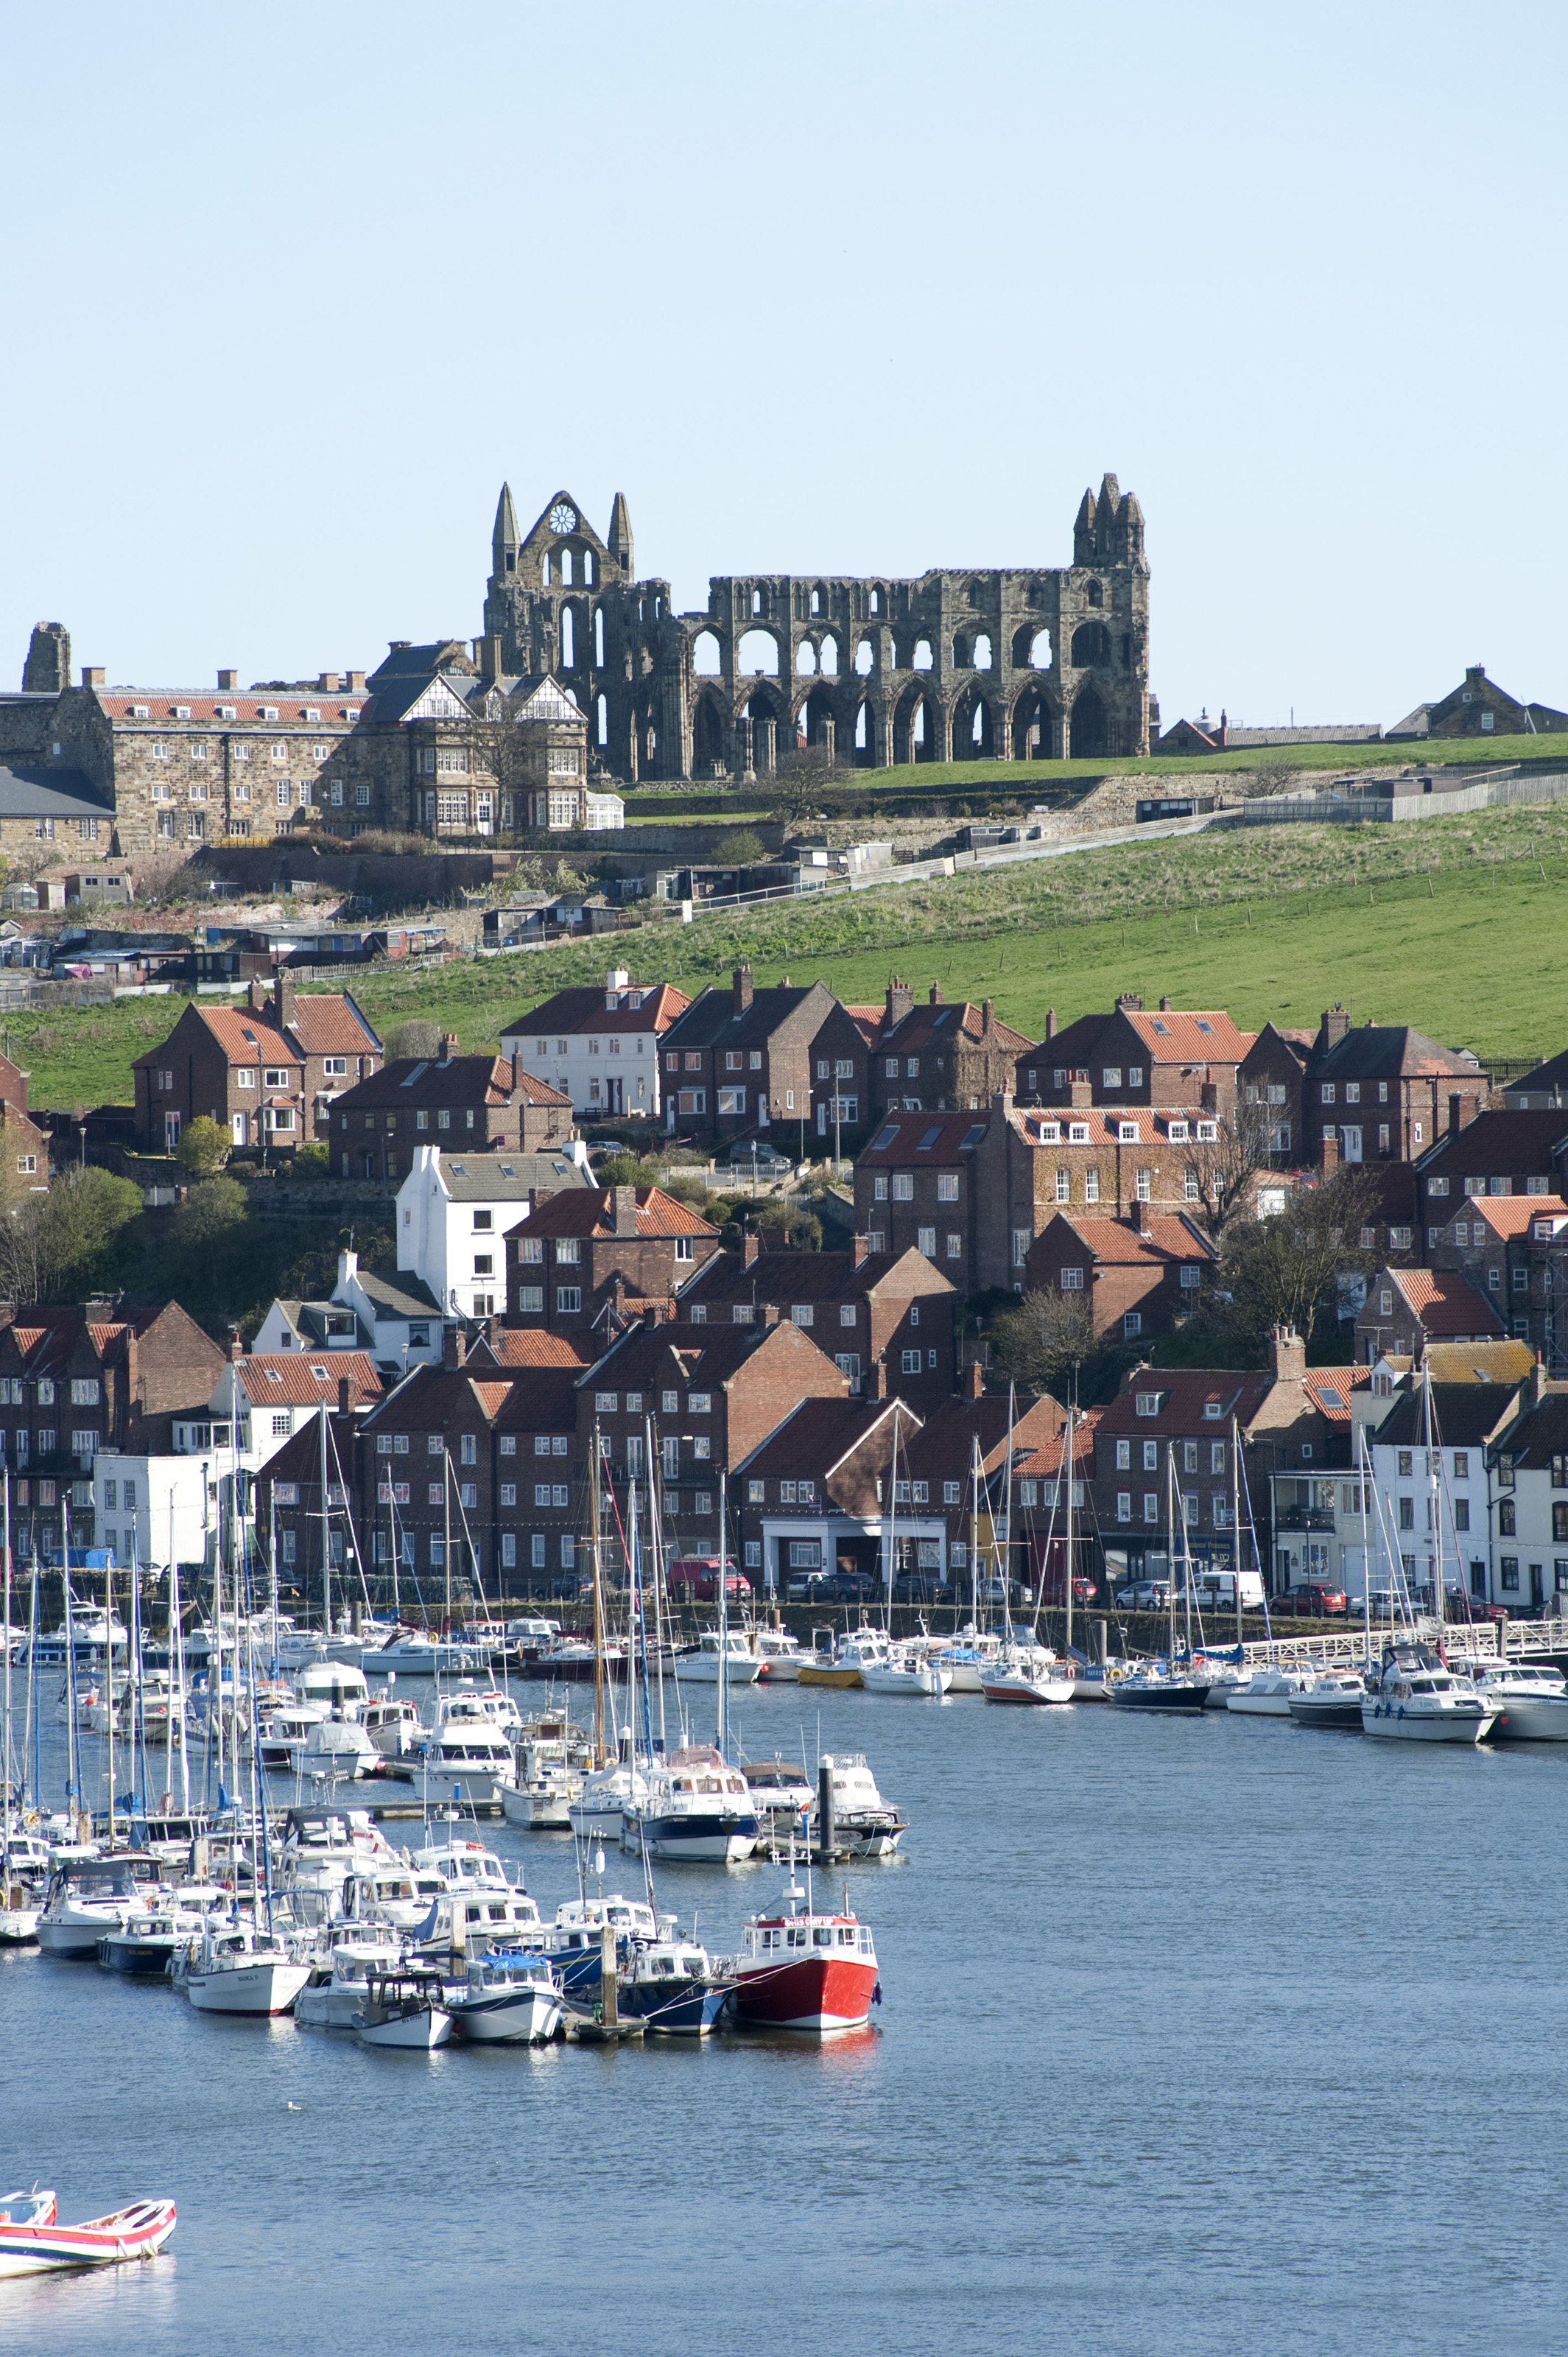 Upper harbour of Whitby with the abbey ruins-7595 | Stockarch Free